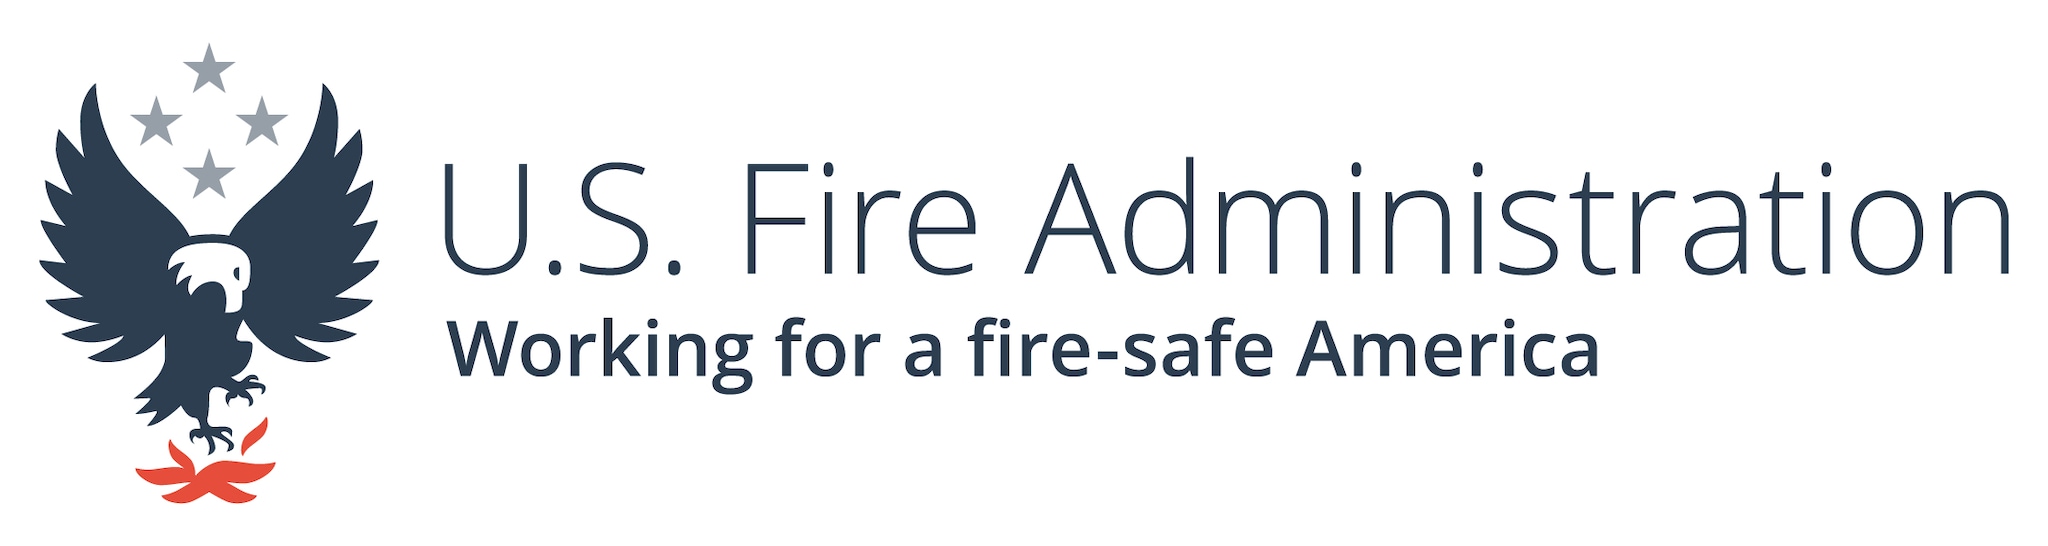 U.S. Fire Administration, Working for a fire-safe America